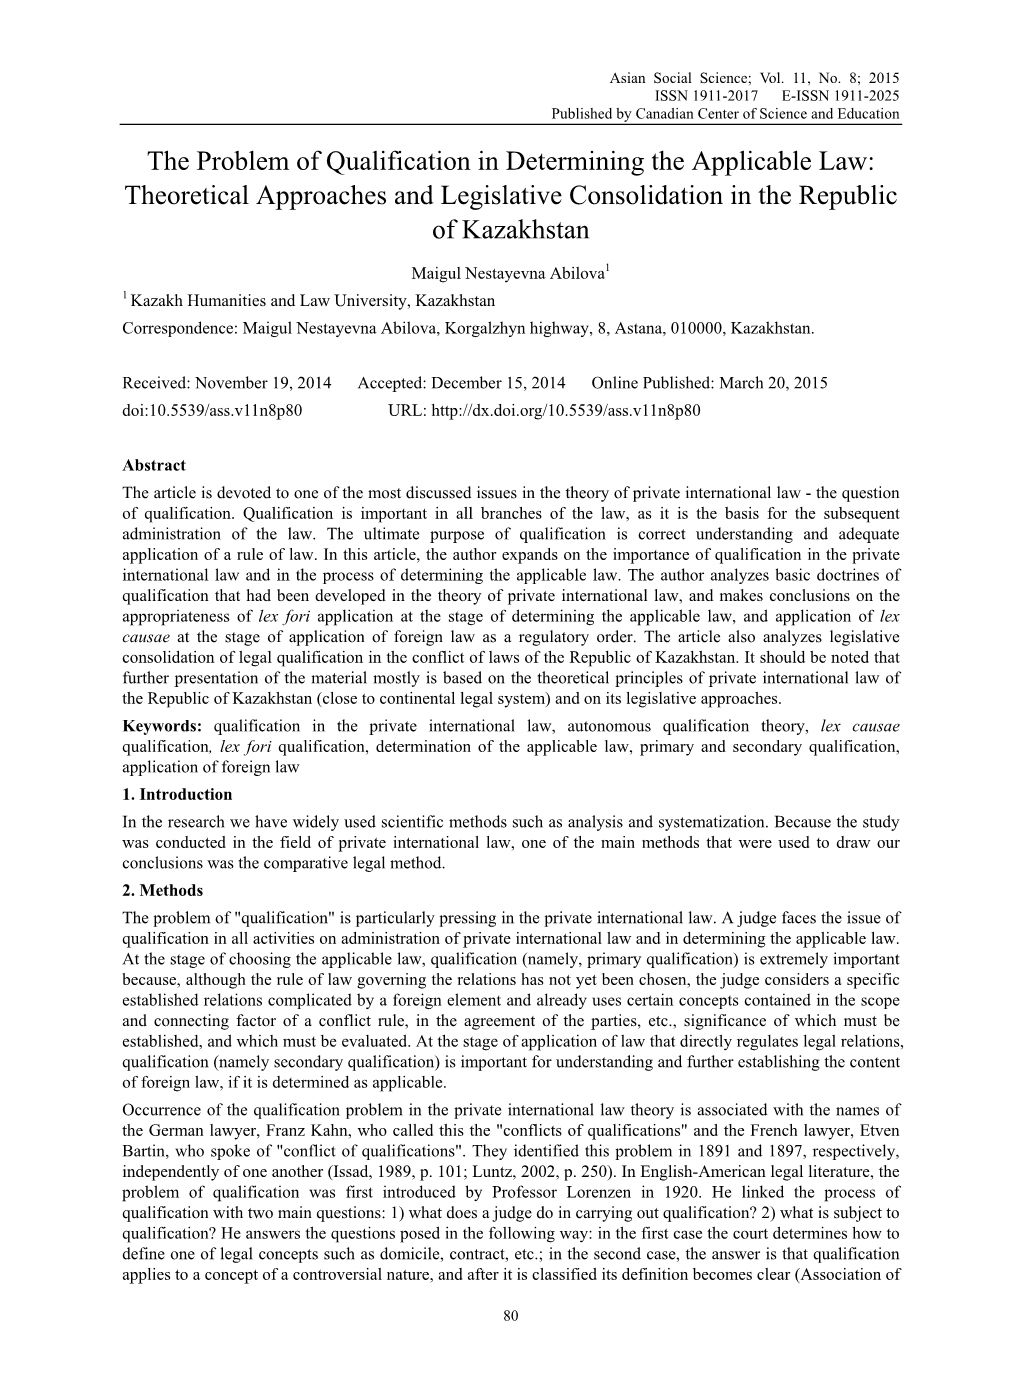 The Problem of Qualification in Determining the Applicable Law: Theoretical Approaches and Legislative Consolidation in the Republic of Kazakhstan